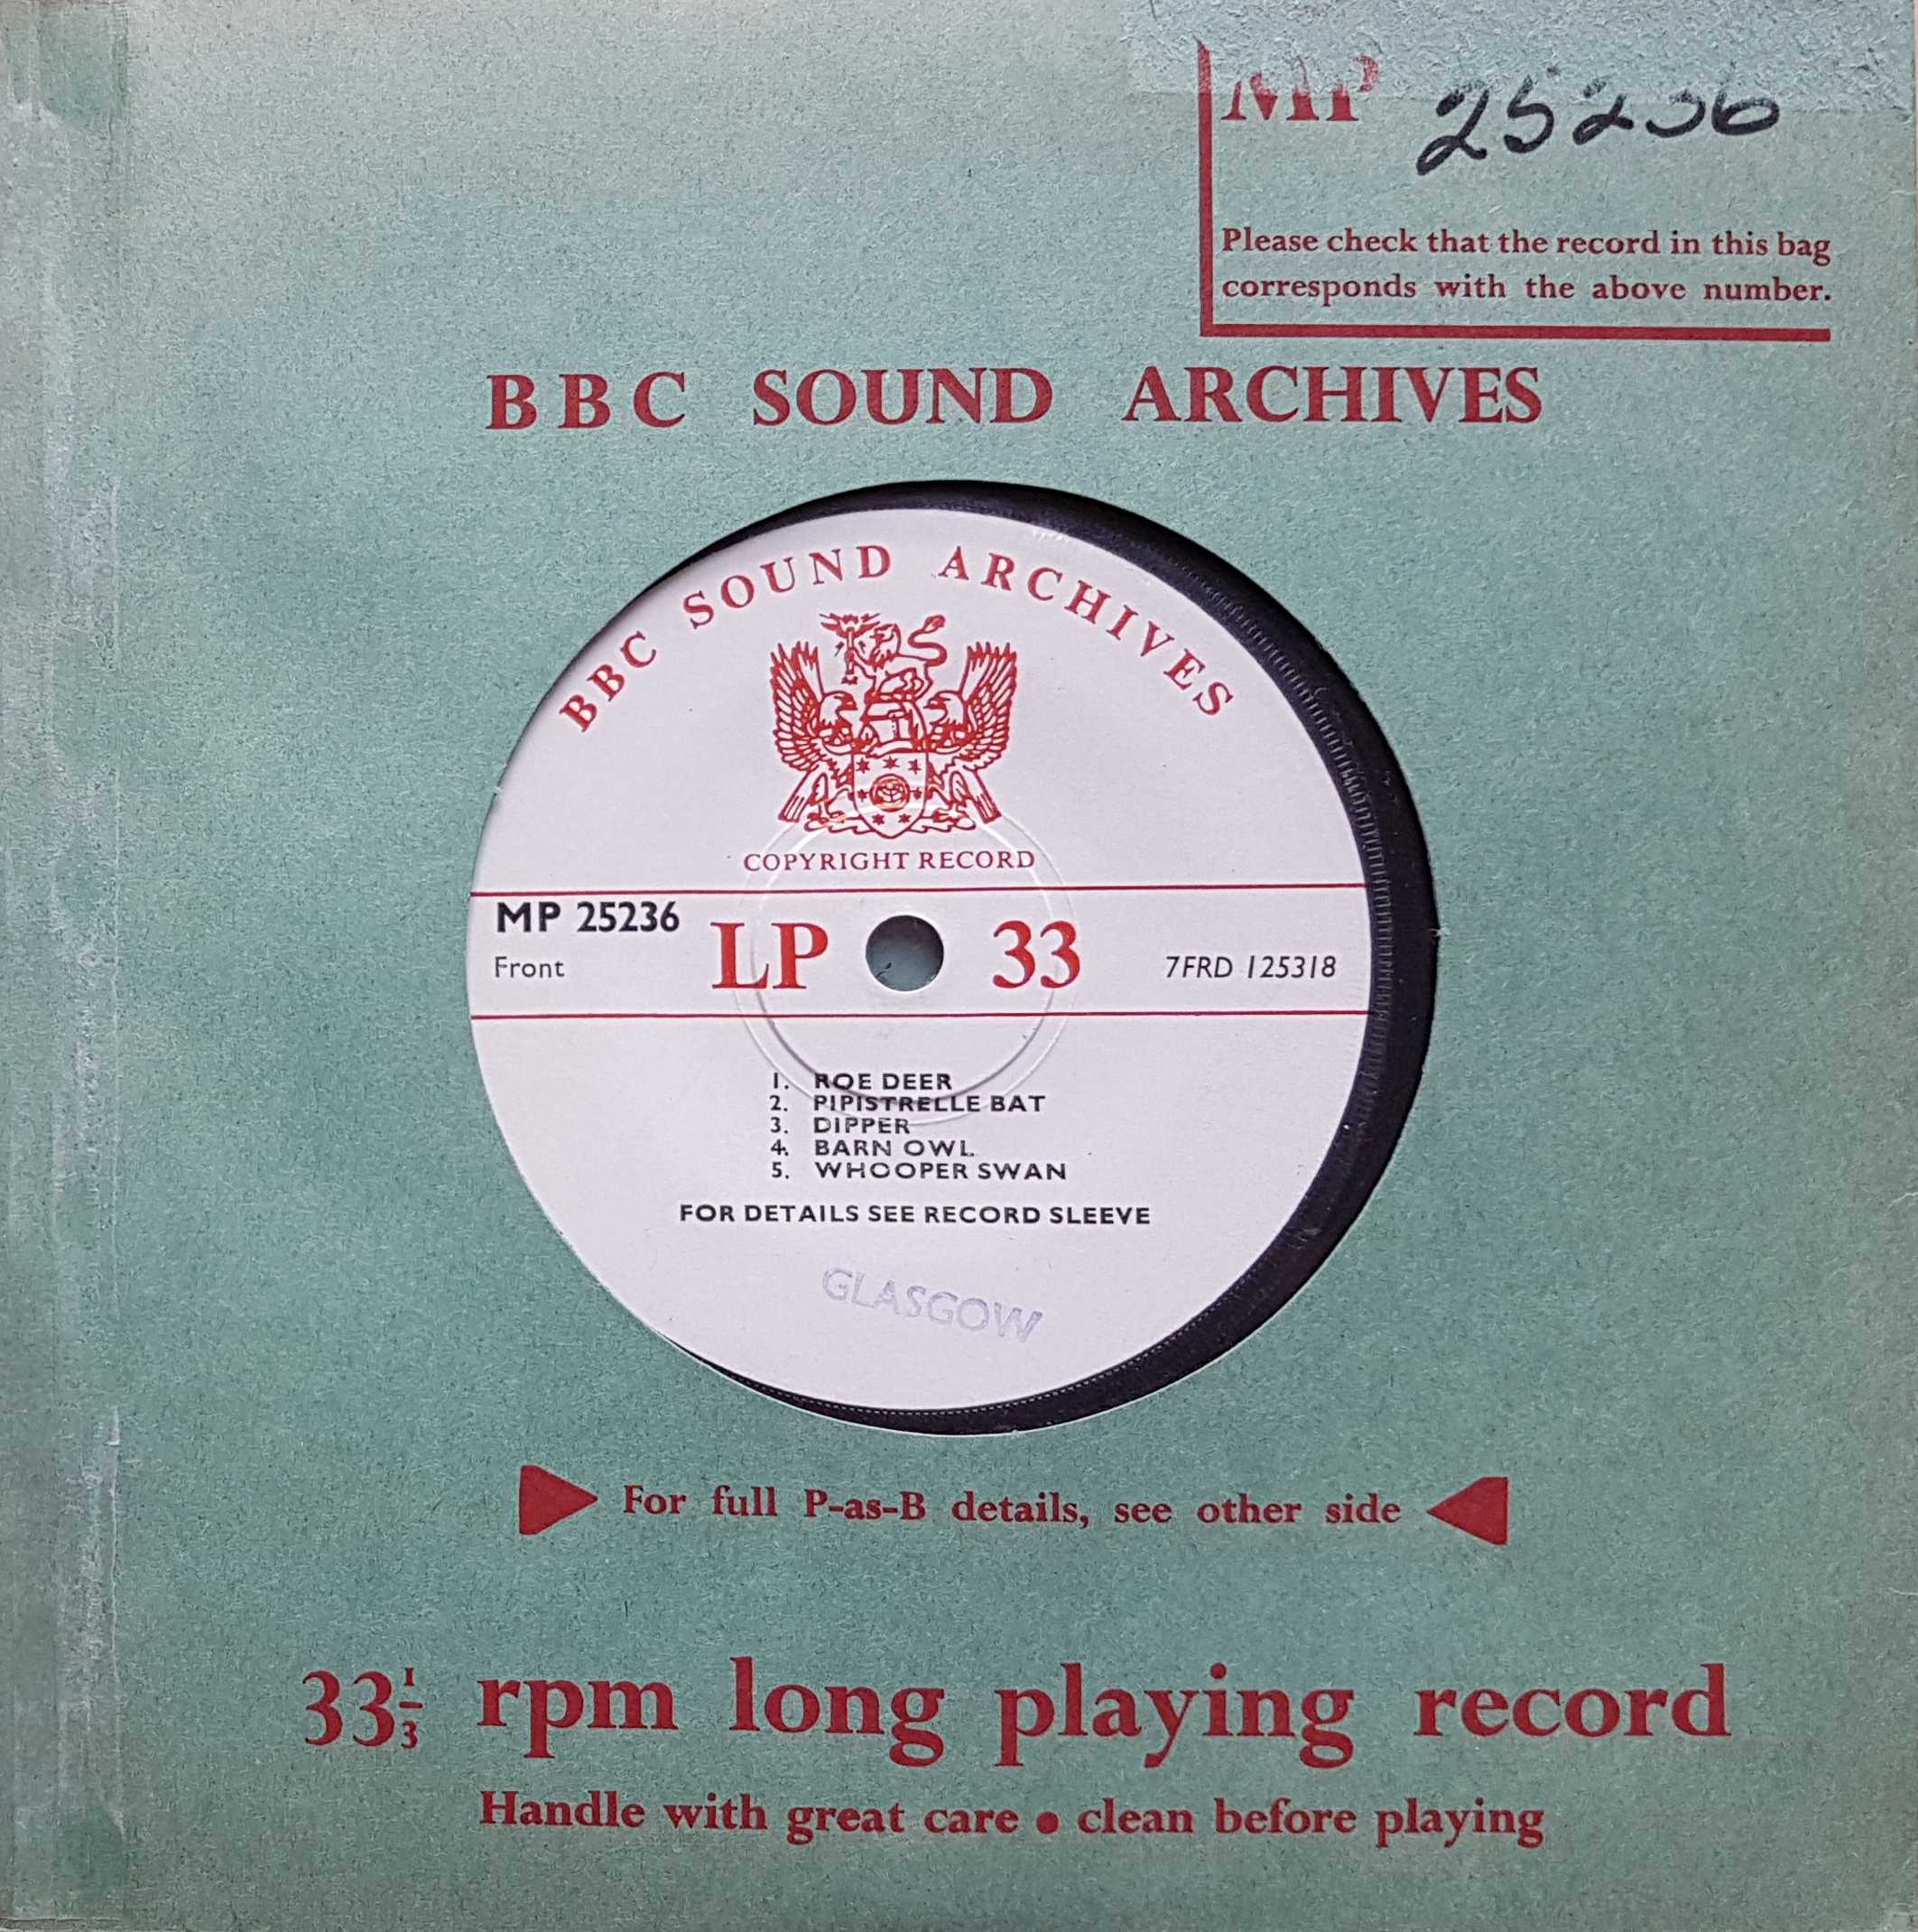 Picture of MP 25236 Animals by artist Not registered from the BBC singles - Records and Tapes library